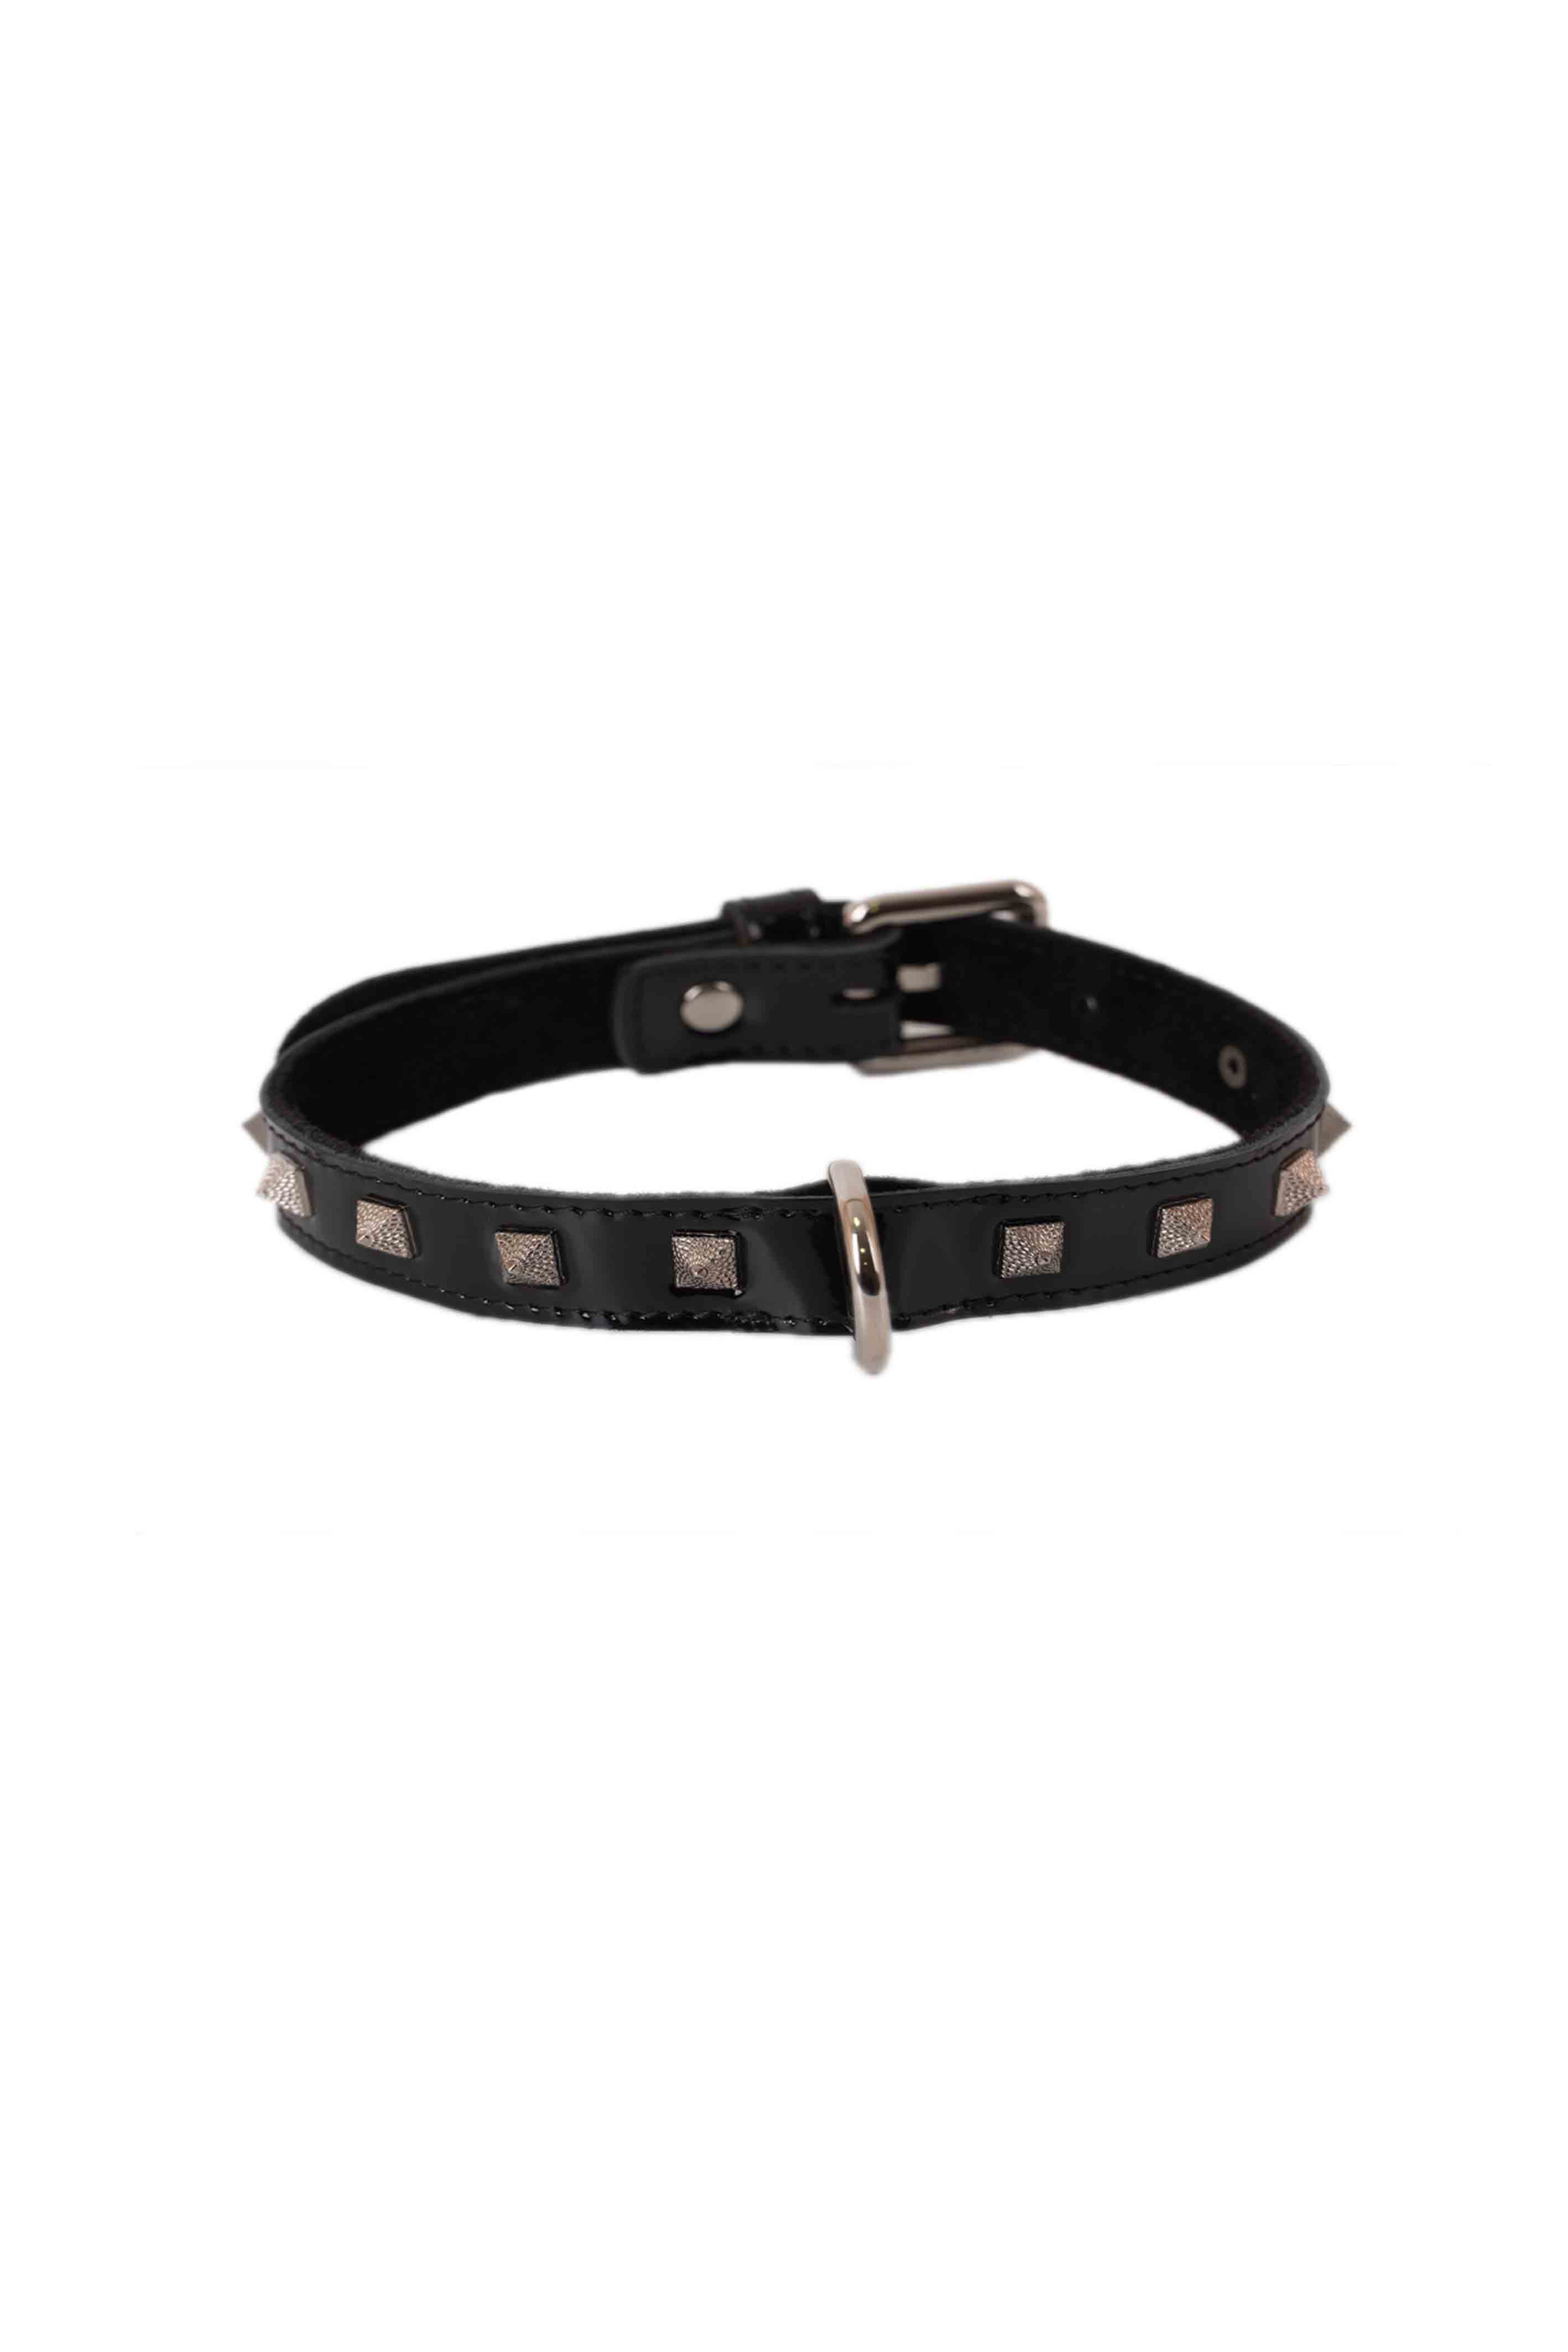 Lacquered Leather Spiked Choker. Black